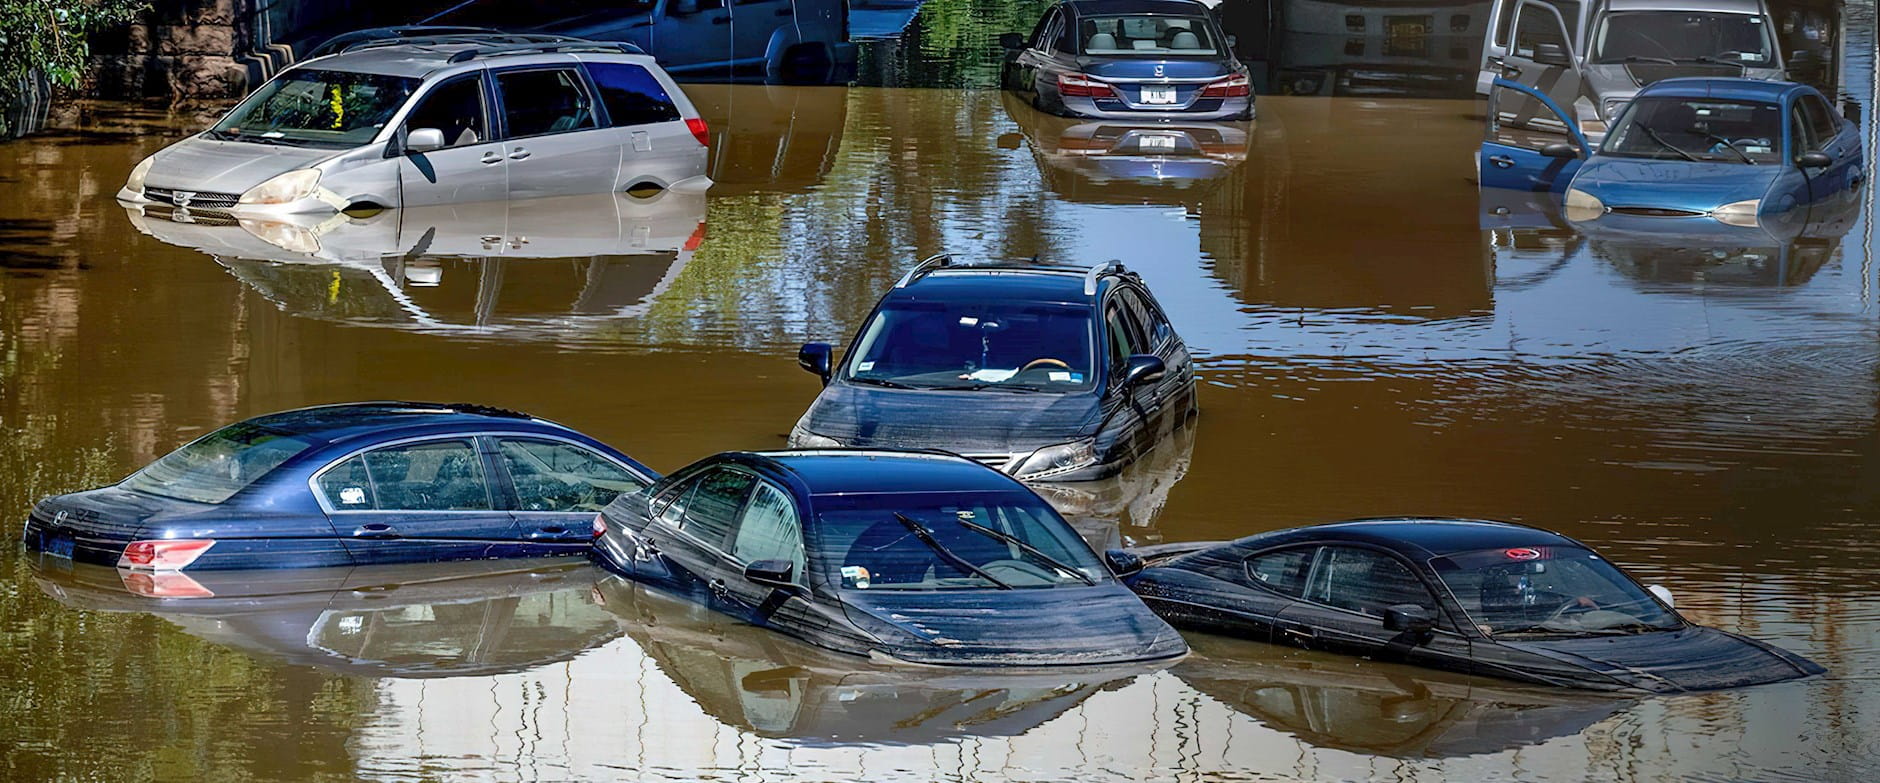 Cars in a flooded lake